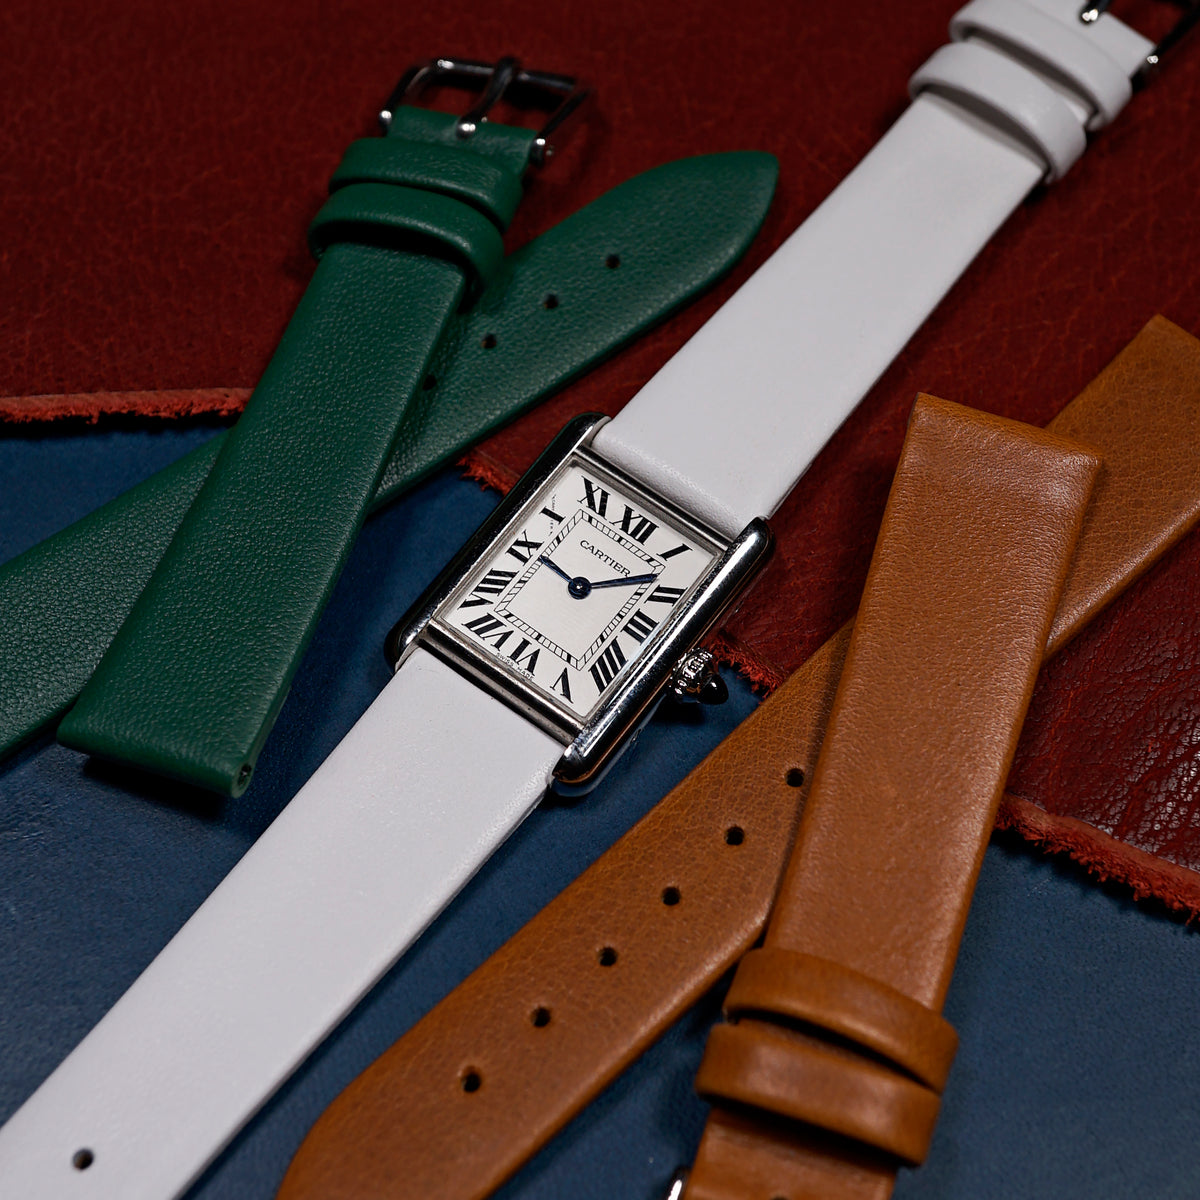 Unstitched Smooth Leather Watch Strap in White